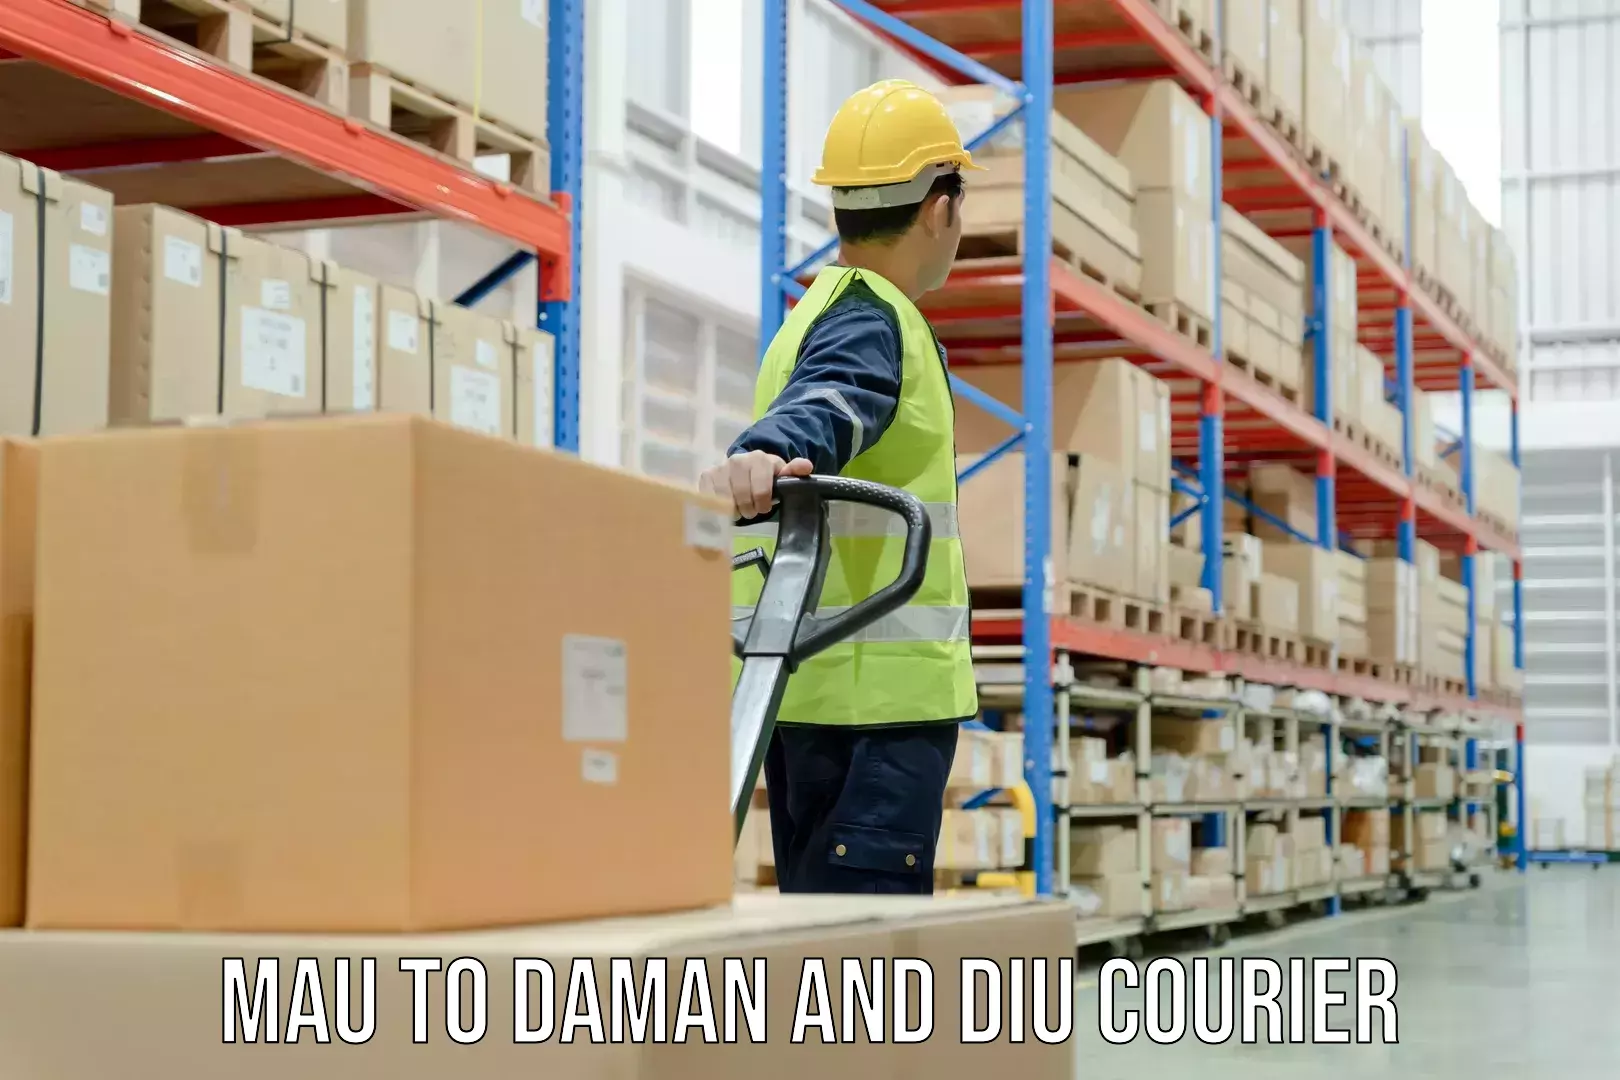 State-of-the-art courier technology Mau to Daman and Diu